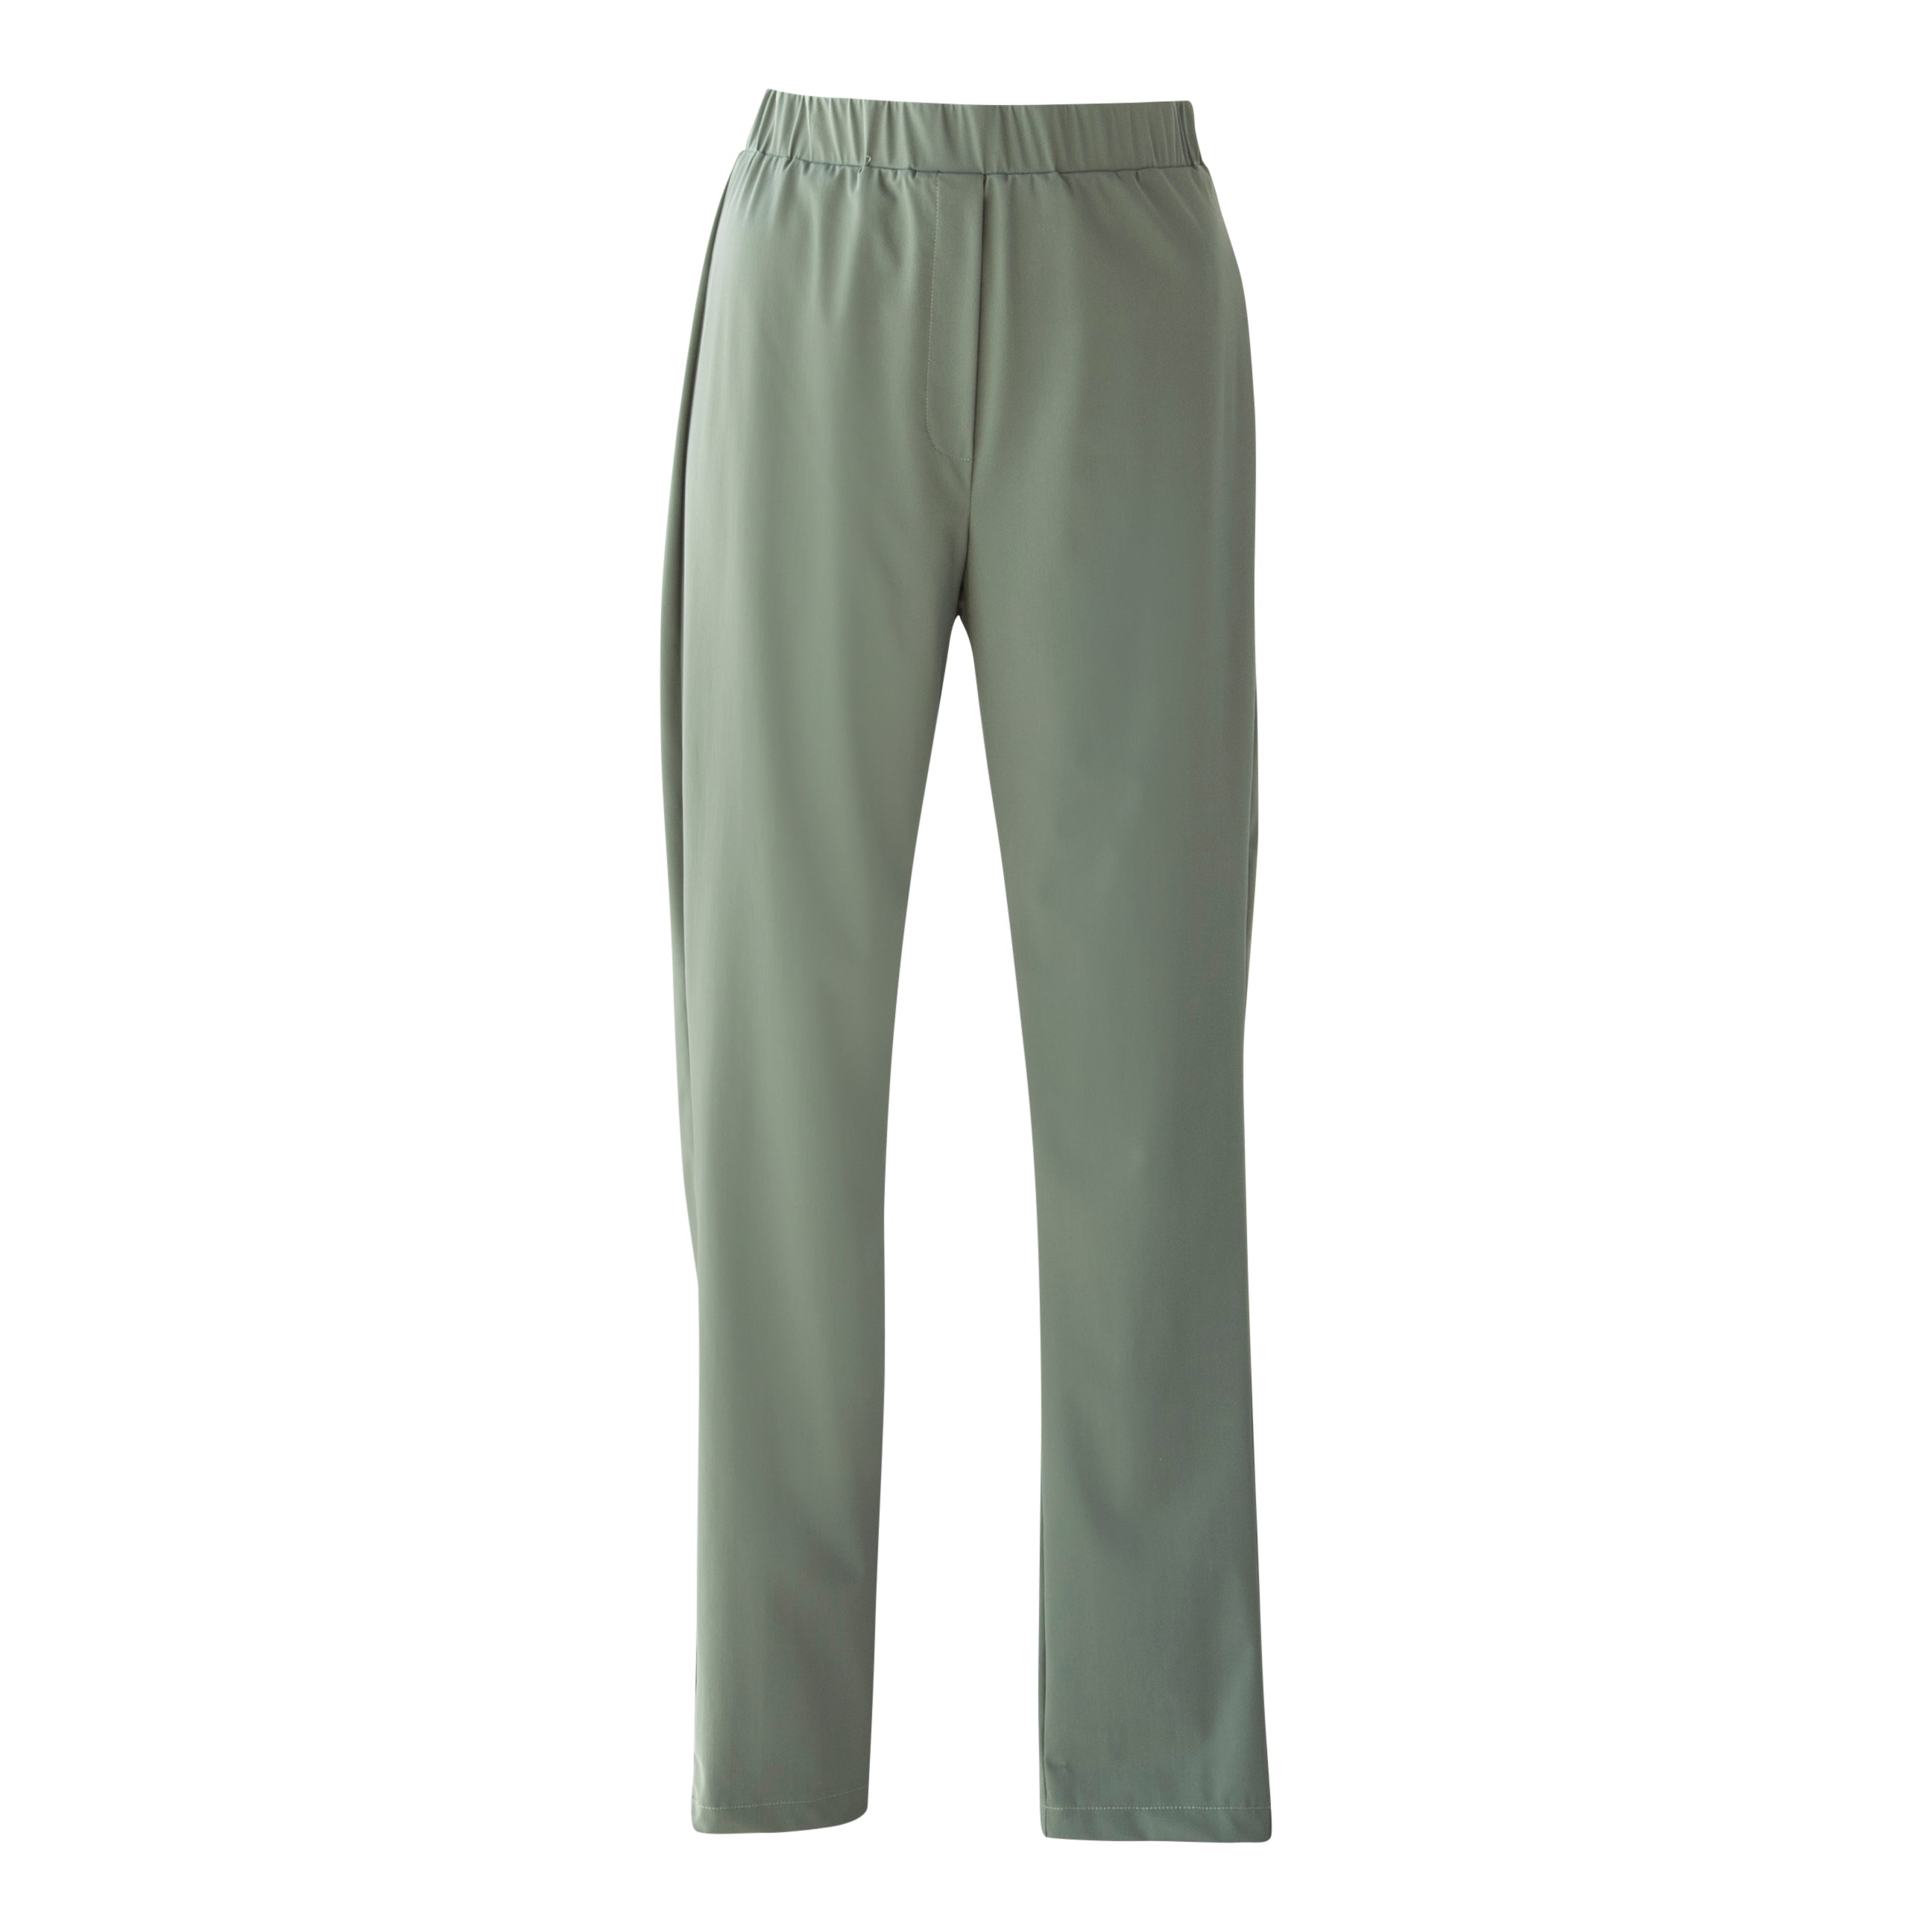 Le Réussi Green Olive Skinny Pants Women's Trousers